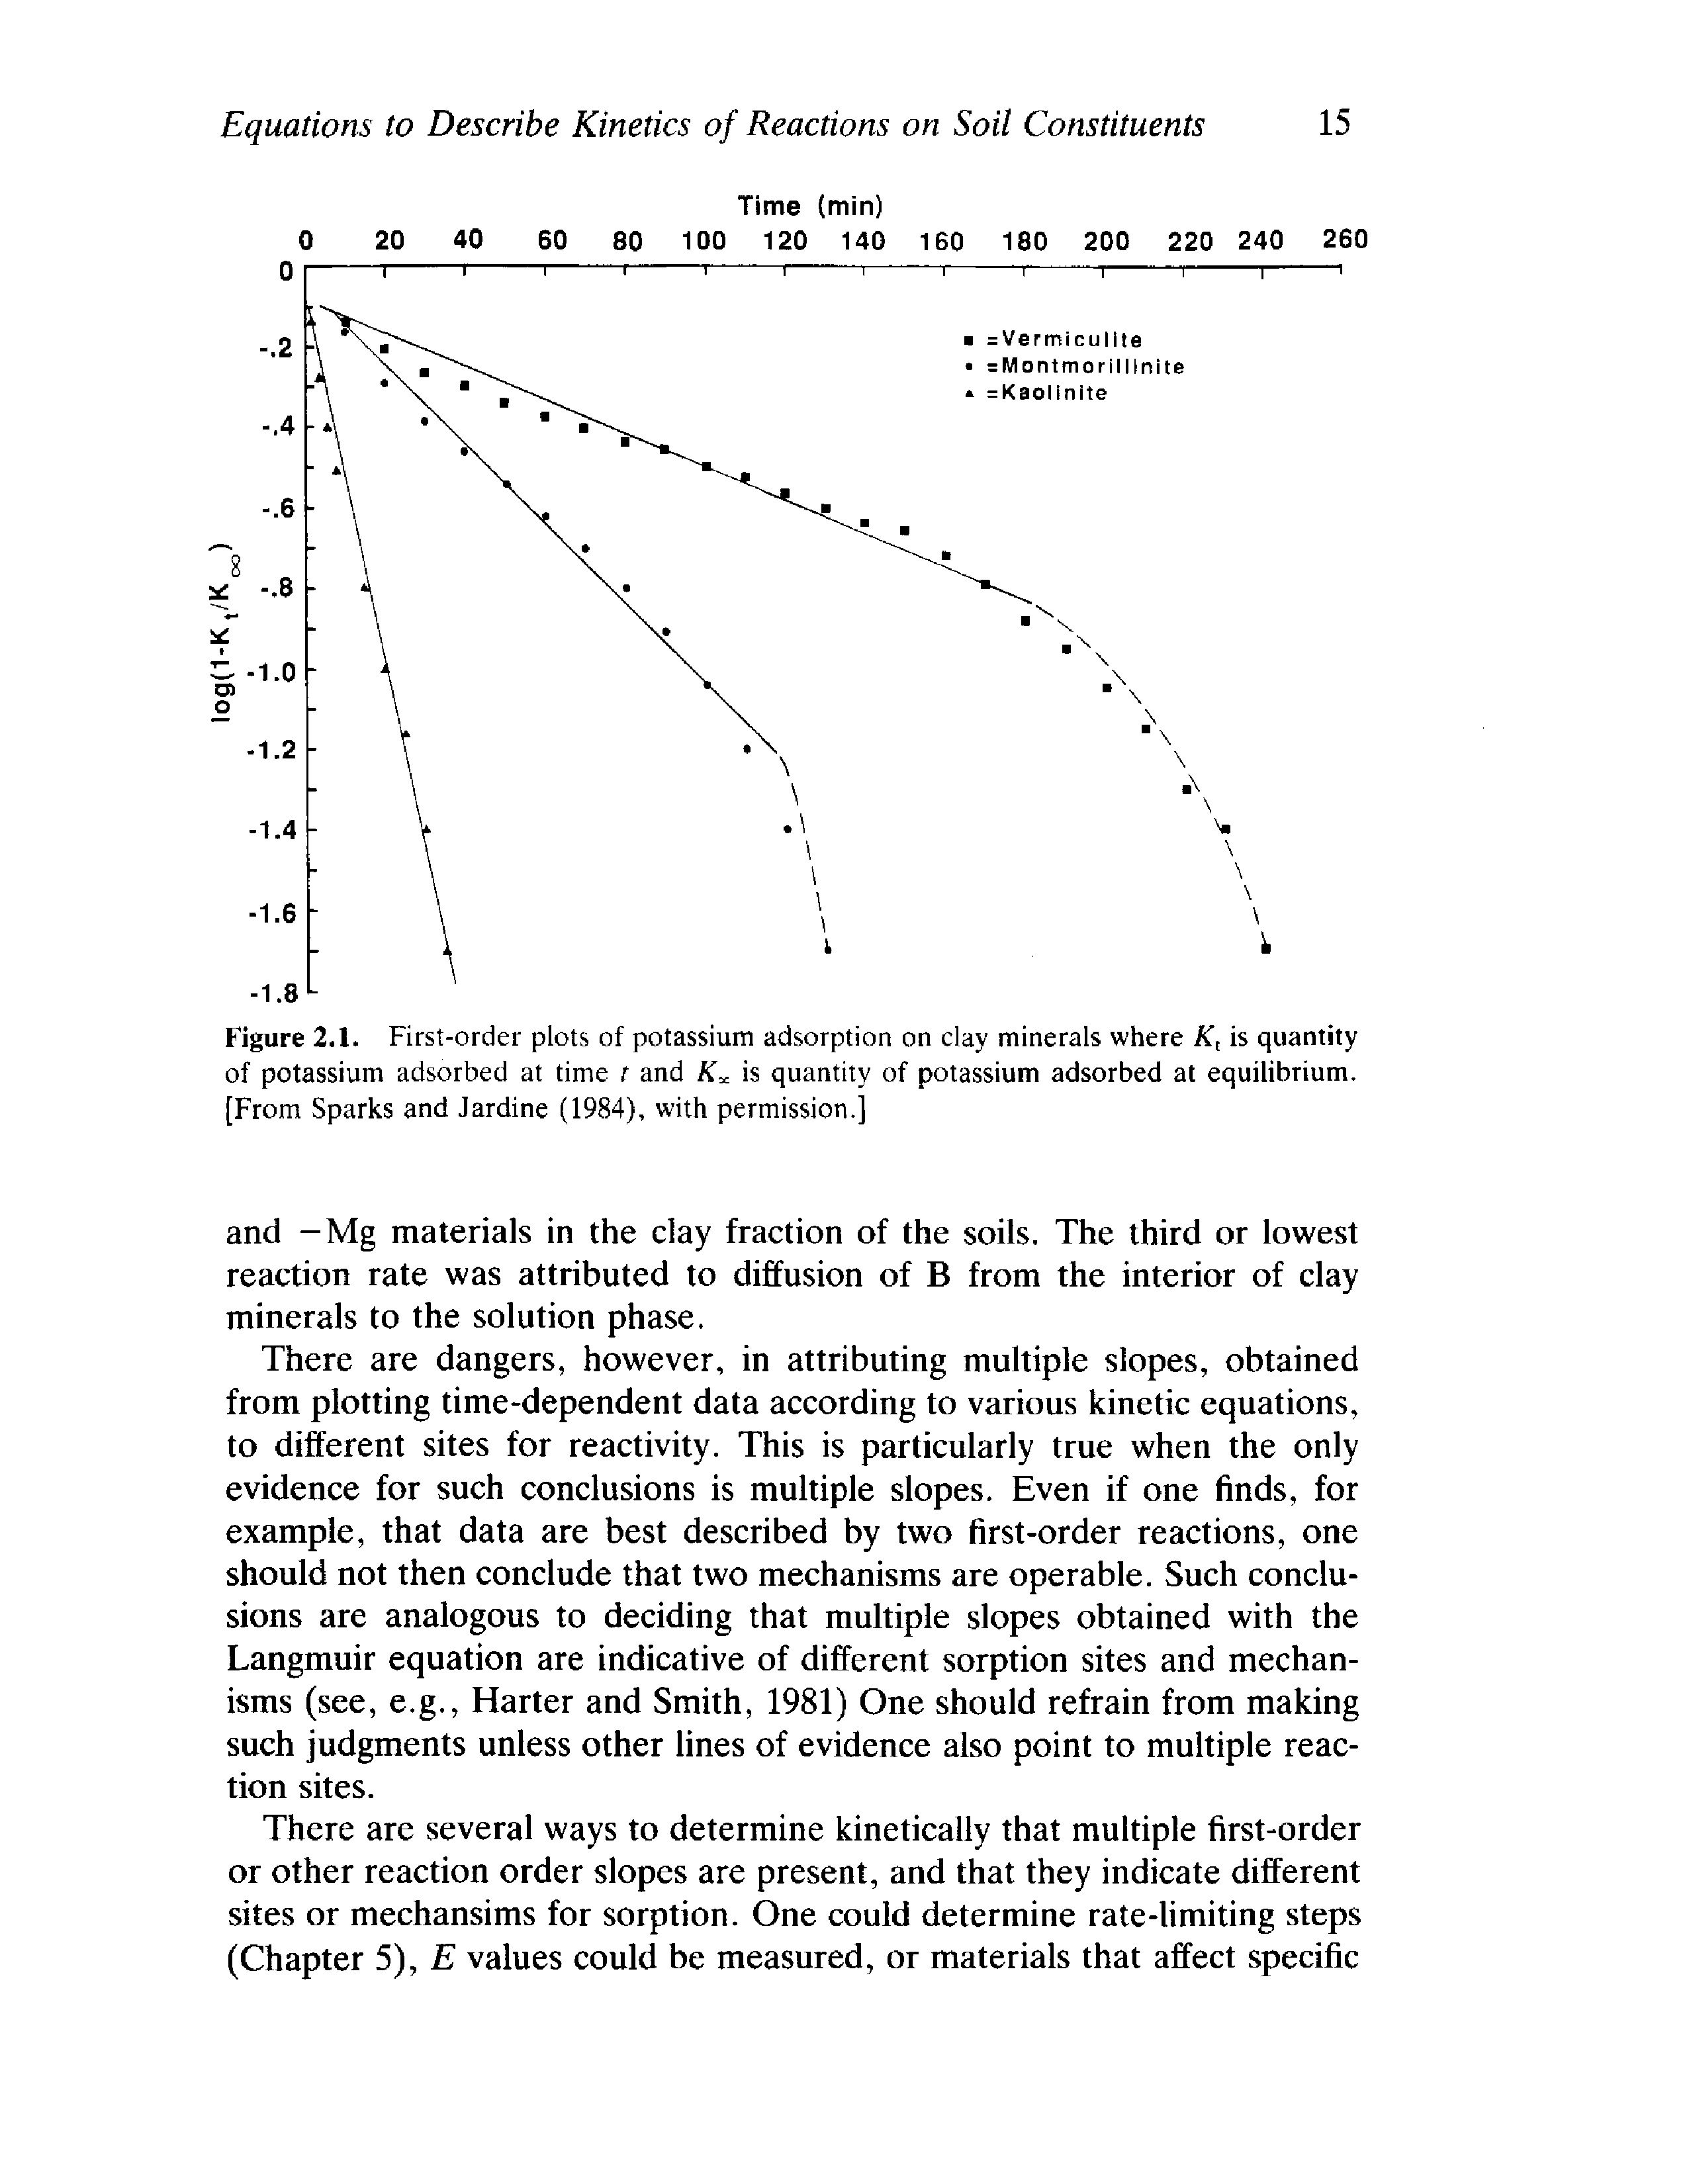 Figure 2.1. First-order plots of potassium adsorption on clay minerals where Kt is quantity of potassium adsorbed at time f and Kx is quantity of potassium adsorbed at equilibrium. [From Sparks and Jardine (1984), with permission.]...